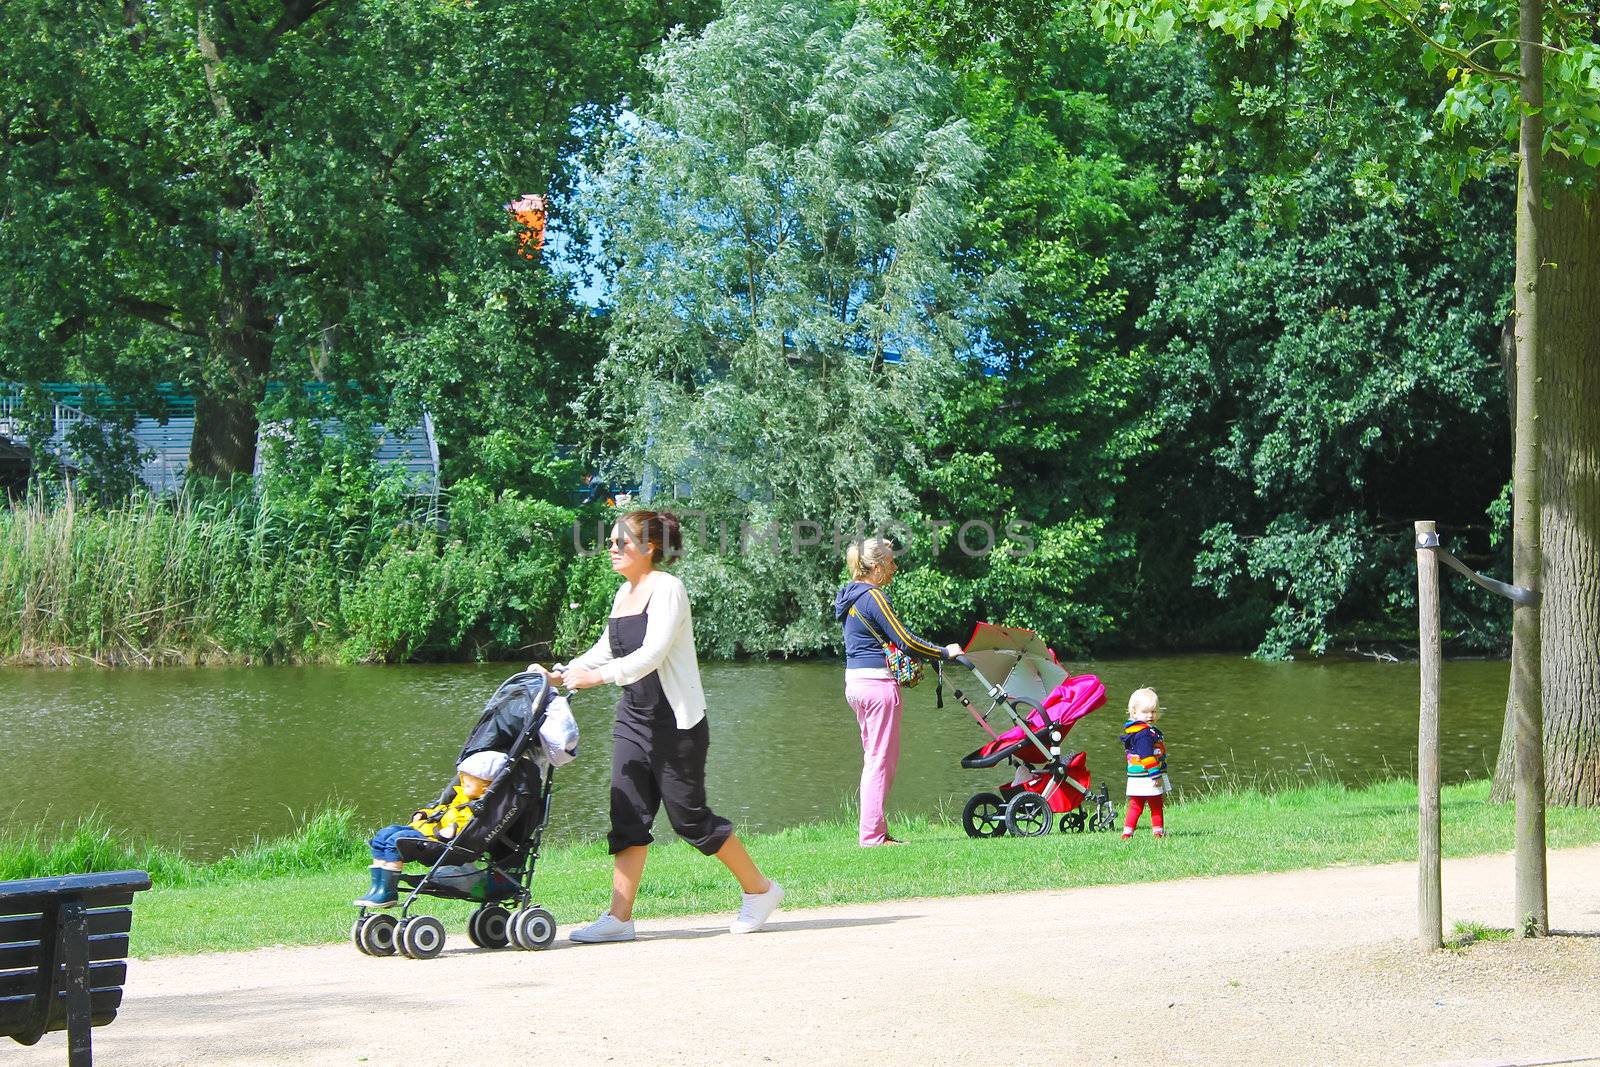 Mothers with children in city park in Amsterdam. Netherlands